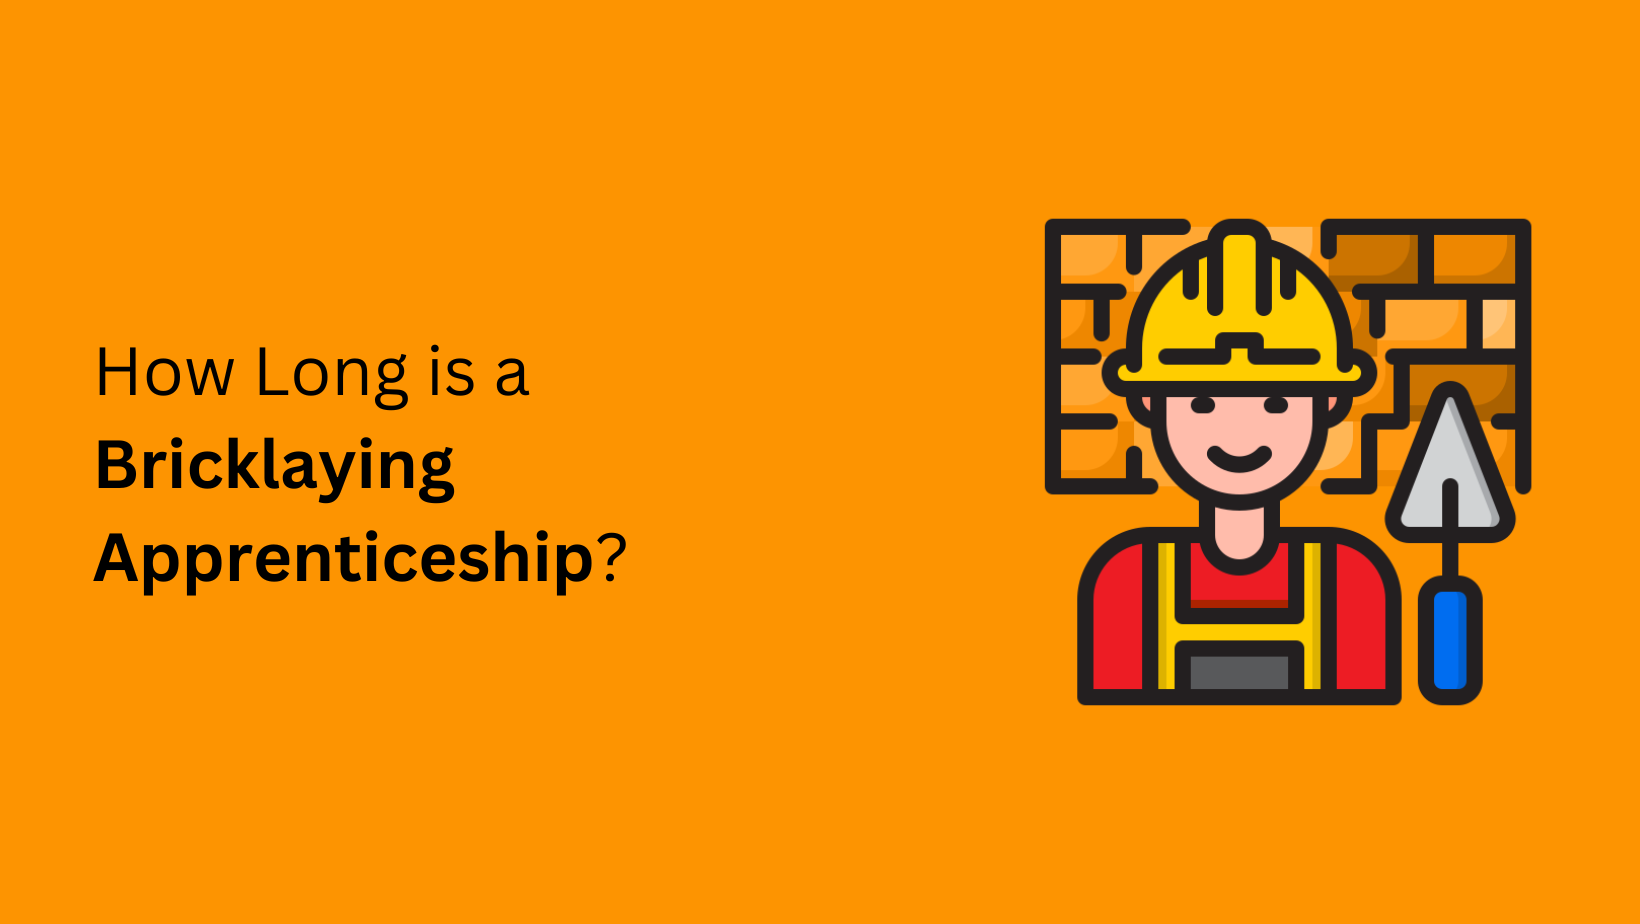 How Long is a Bricklaying Apprenticeship